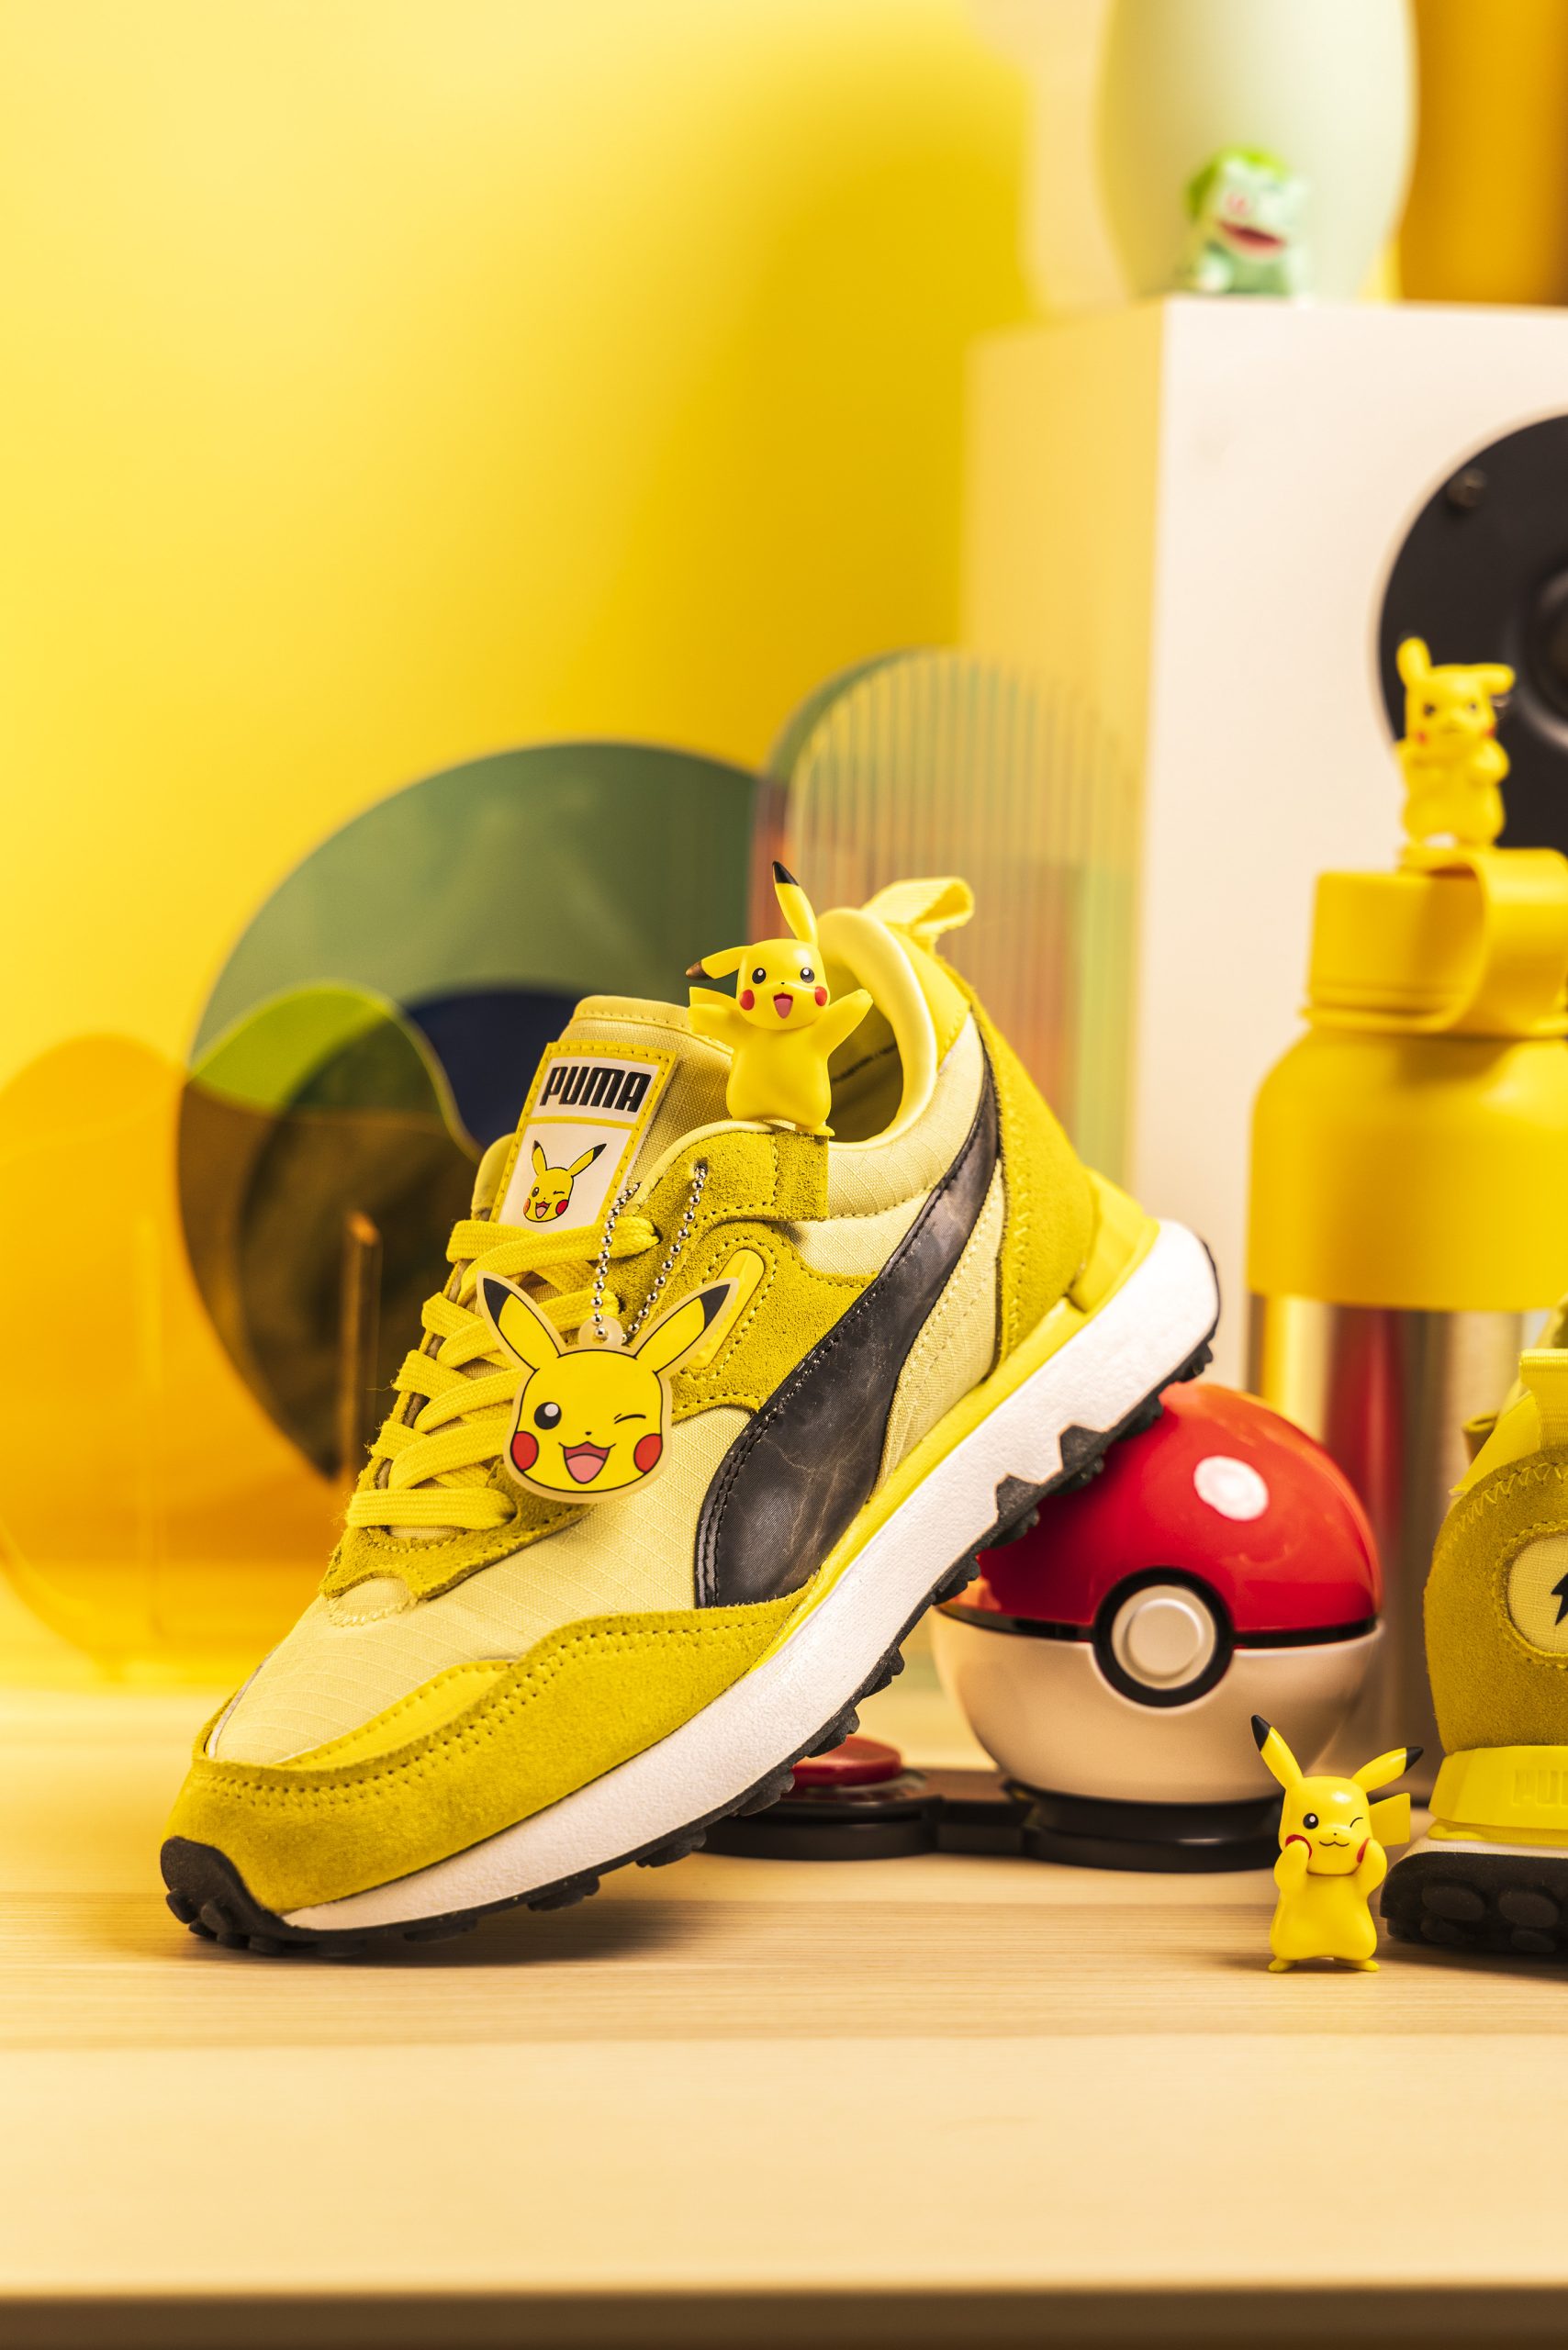 Puma Announces Partnership With Pokémon For A Special Collection Of Footwear, Apparel, And Accessories; Priced From RM129 To RM649 7